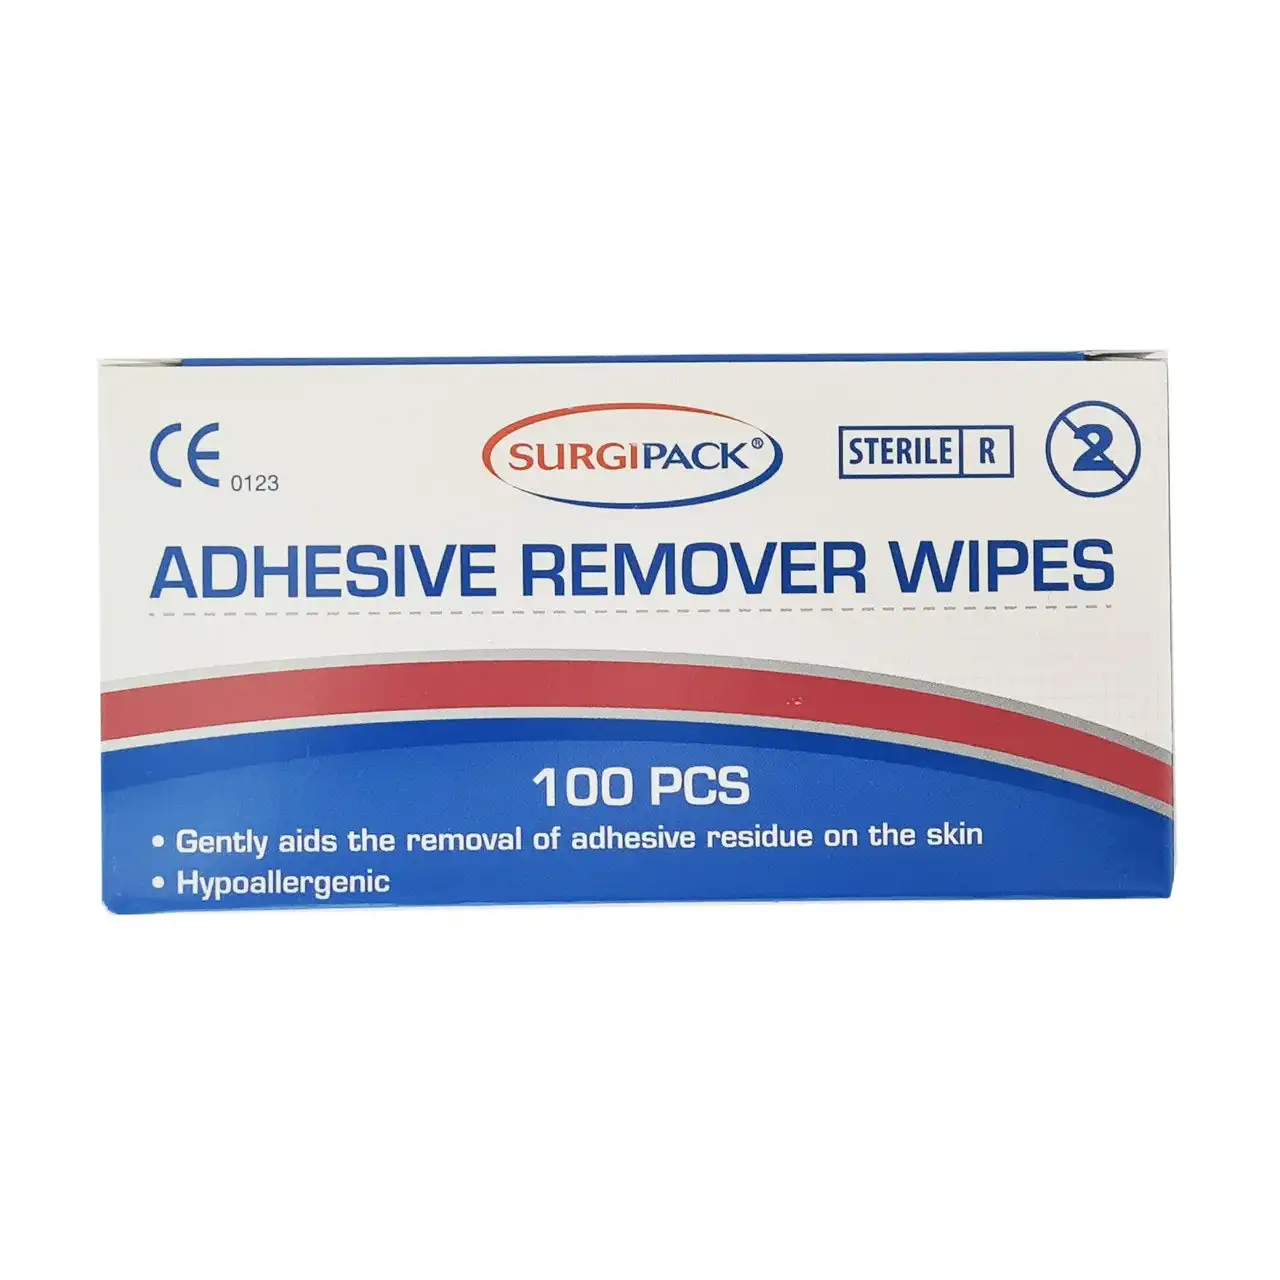 SurgiPack Adhesive Remover Wipes 100